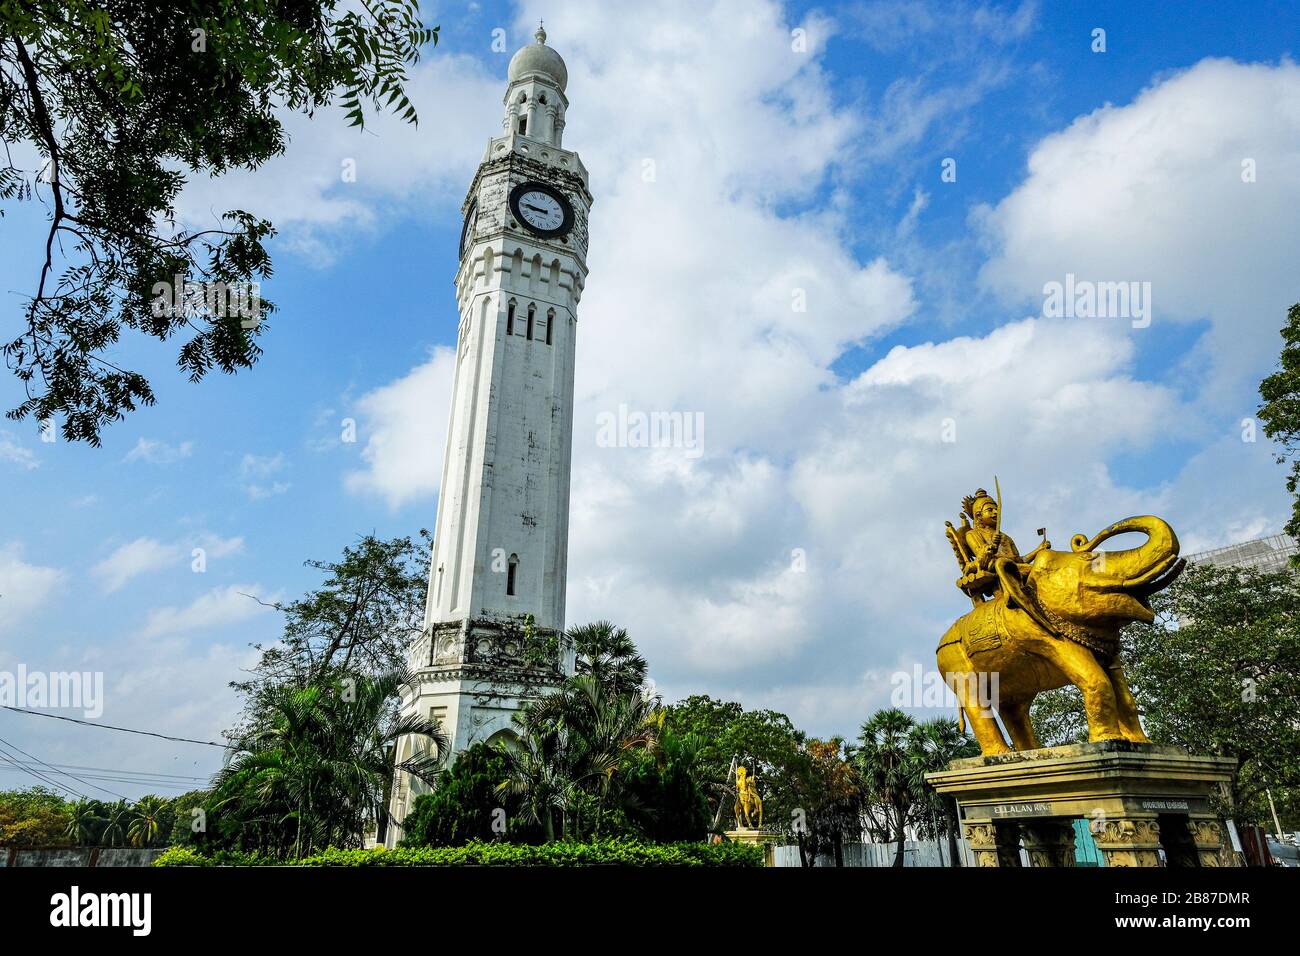 Jaffna, Sri Lanka - February 2020: Jaffna Clock Tower, built in 1875 to honor the visit of the Prince of Wales on February 21, 2020 in Jaffna, Sri Lan Stock Photo